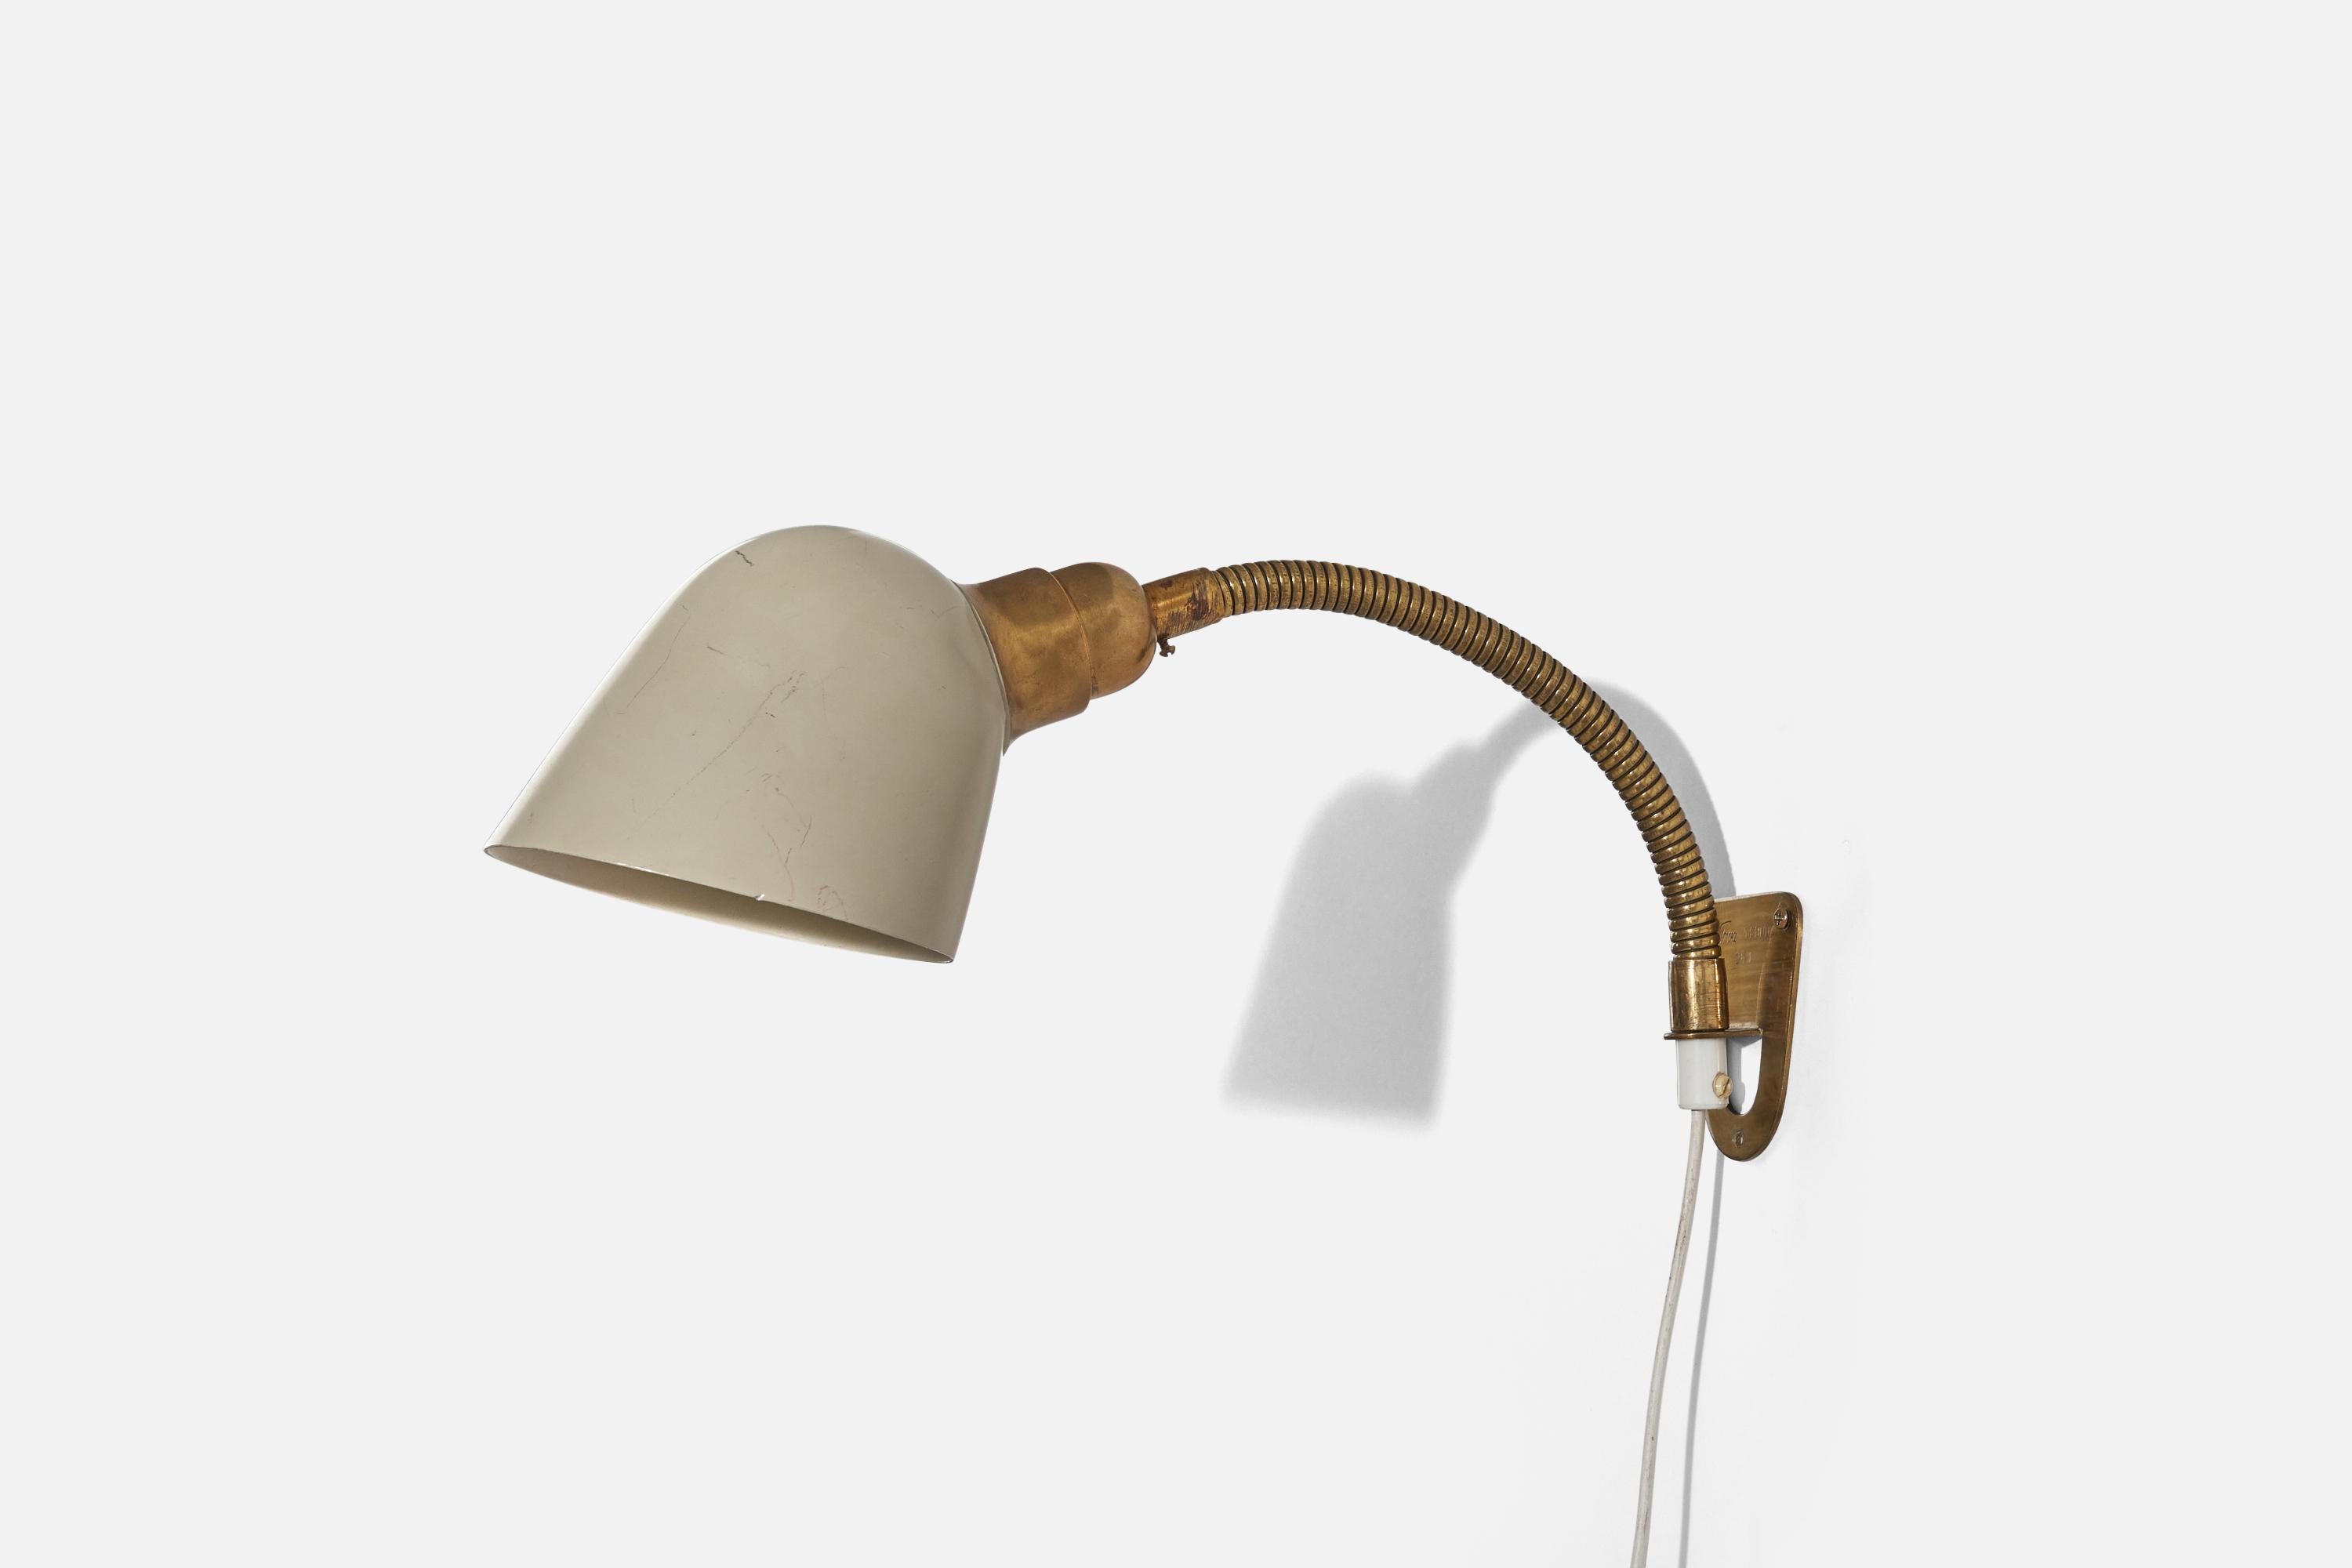 A brass and metal wall light designed by Bertil Brisborg and produced by Nordiska Kompaniet, Sweden, c. 1940s.

Variable dimensions, measured as illustrated in the first image. 

Dimensions of back plate (inches) : 3 x 2.25 x 0.0625 (H x W x D).